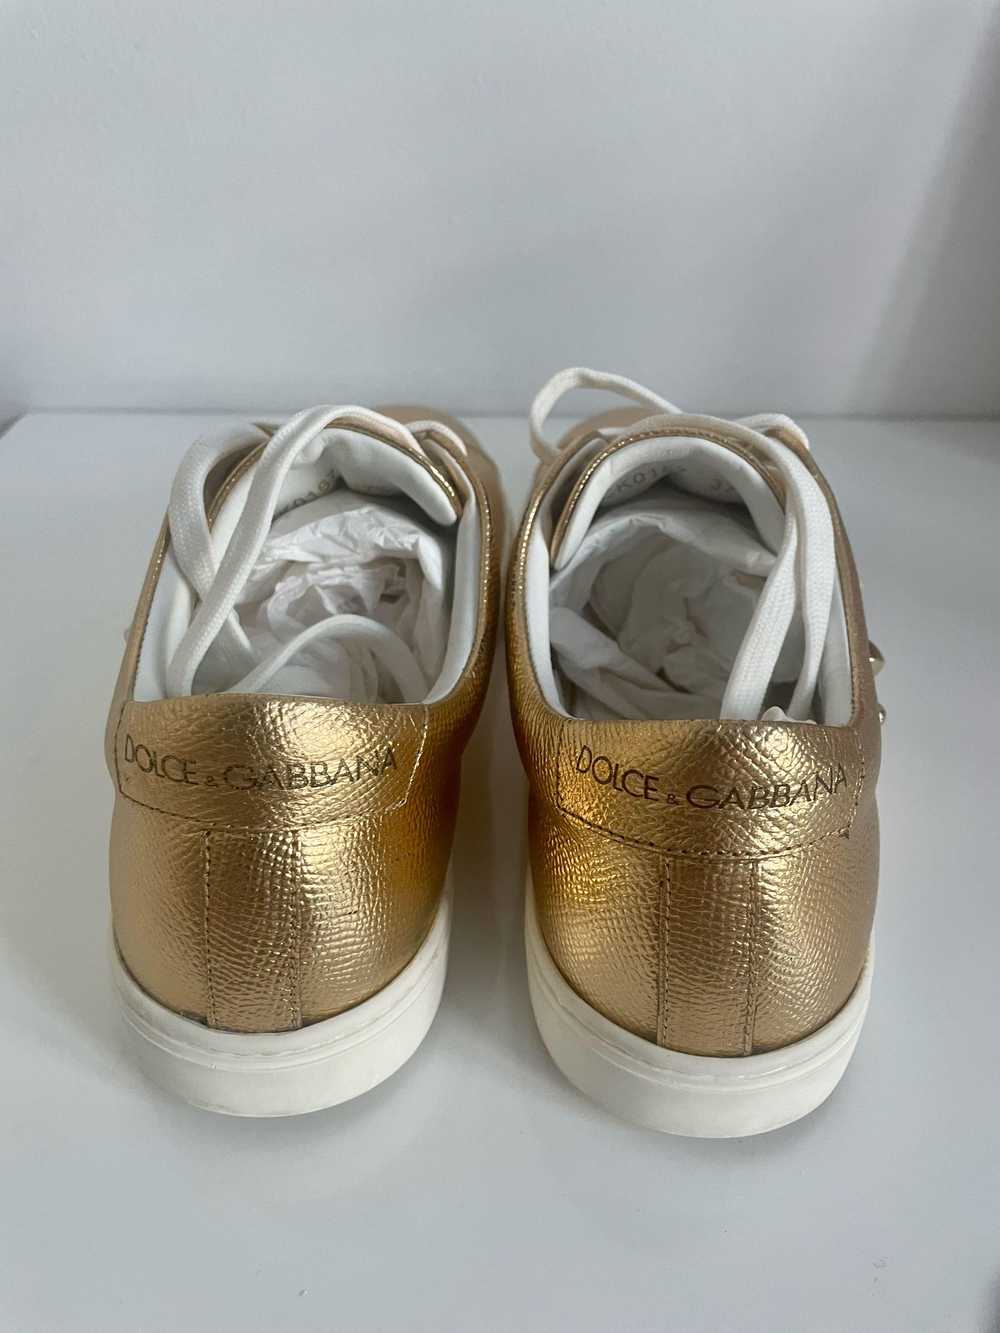 Dolce & Gabbana Gold Leather Devotion Sneakers - image 4